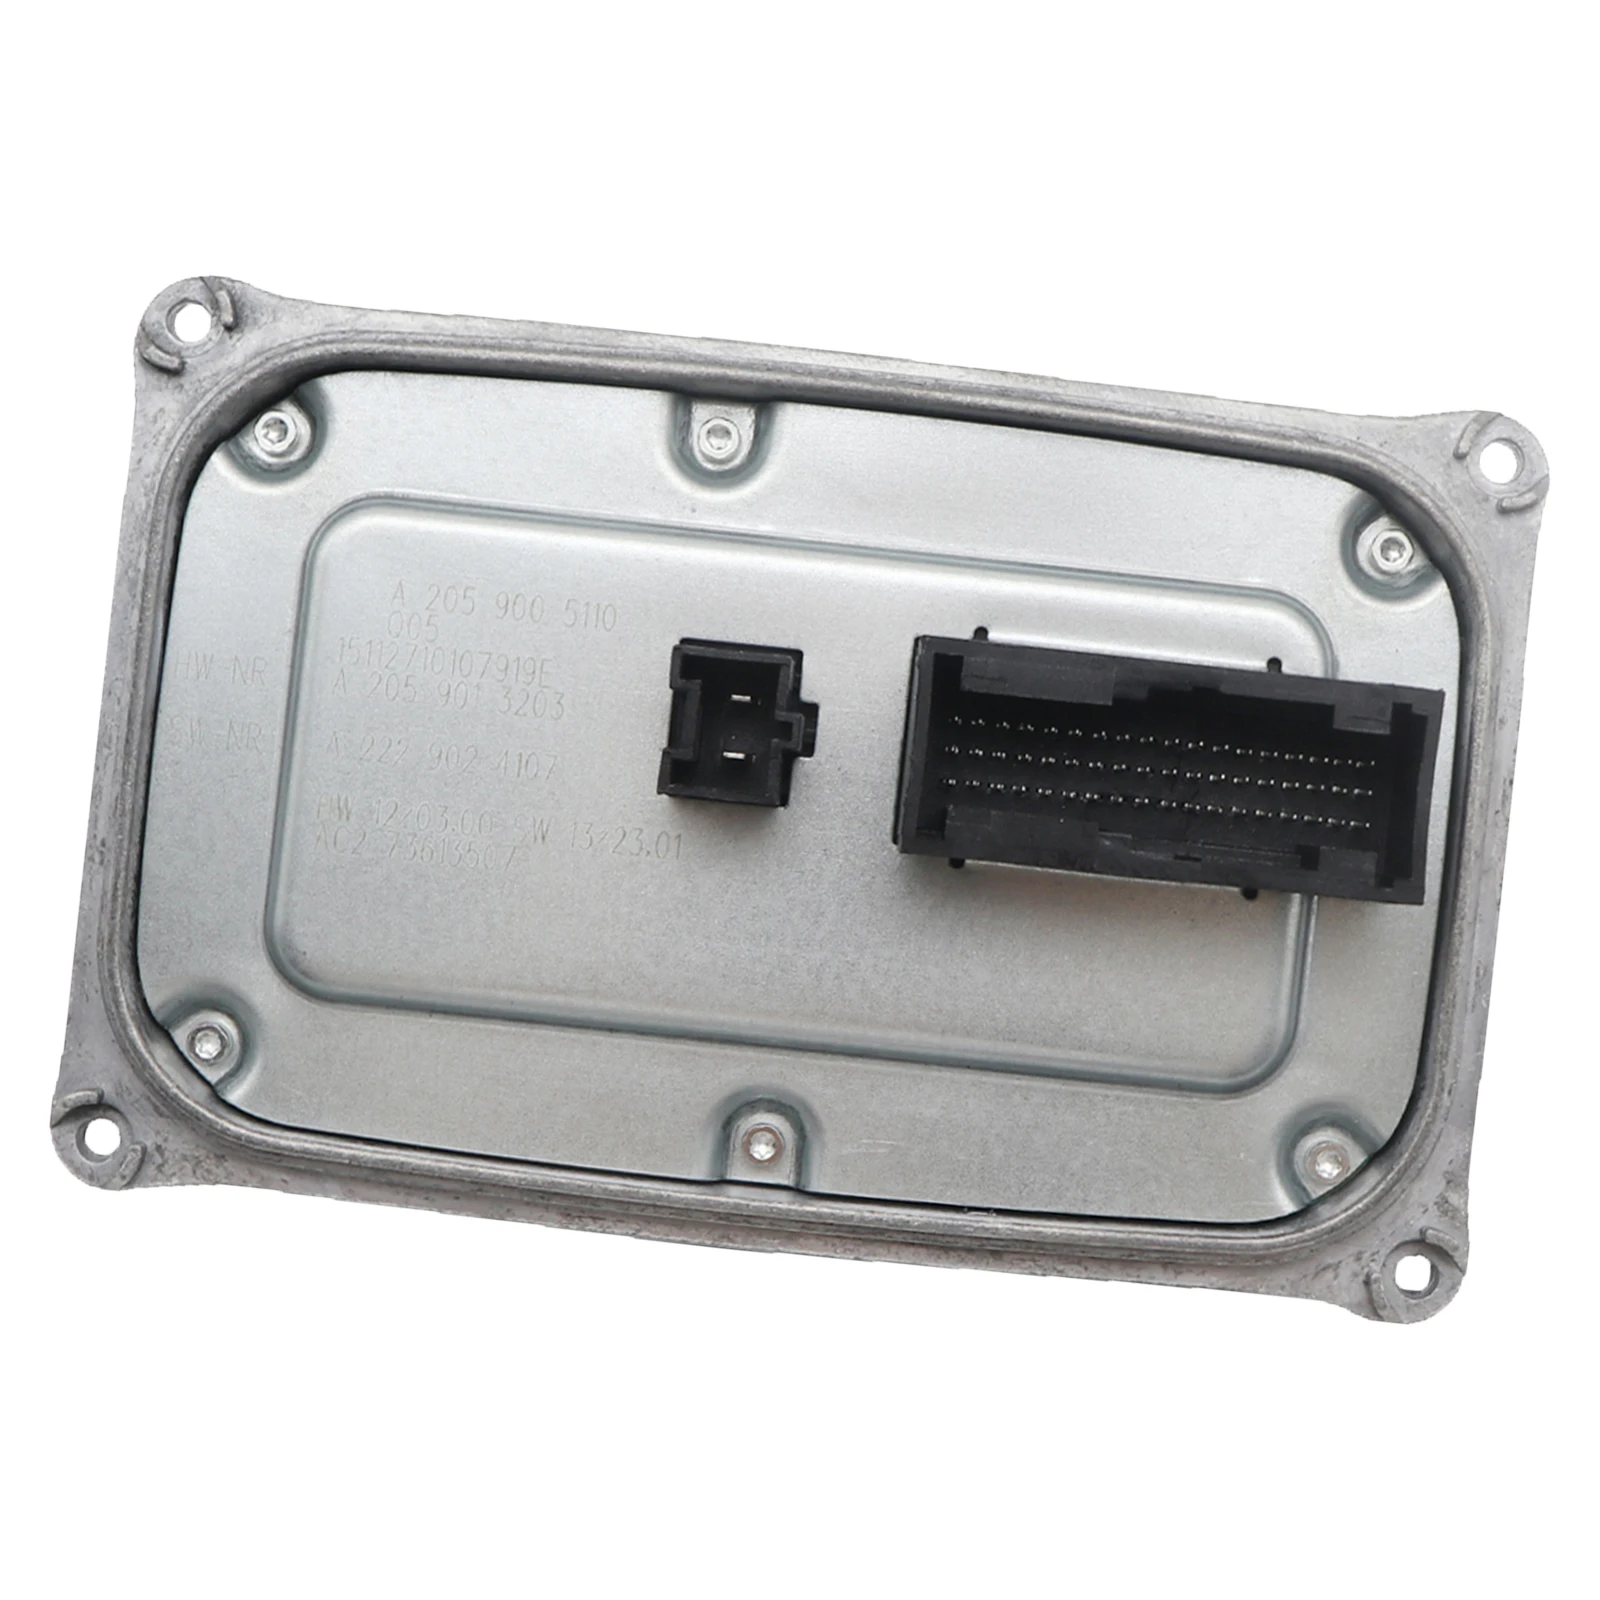 1 Piece Vehicle LED Headlight Control Module, Accessories, Supplies for C-Class W205/V205, S205/C205 13-18 A2059005110